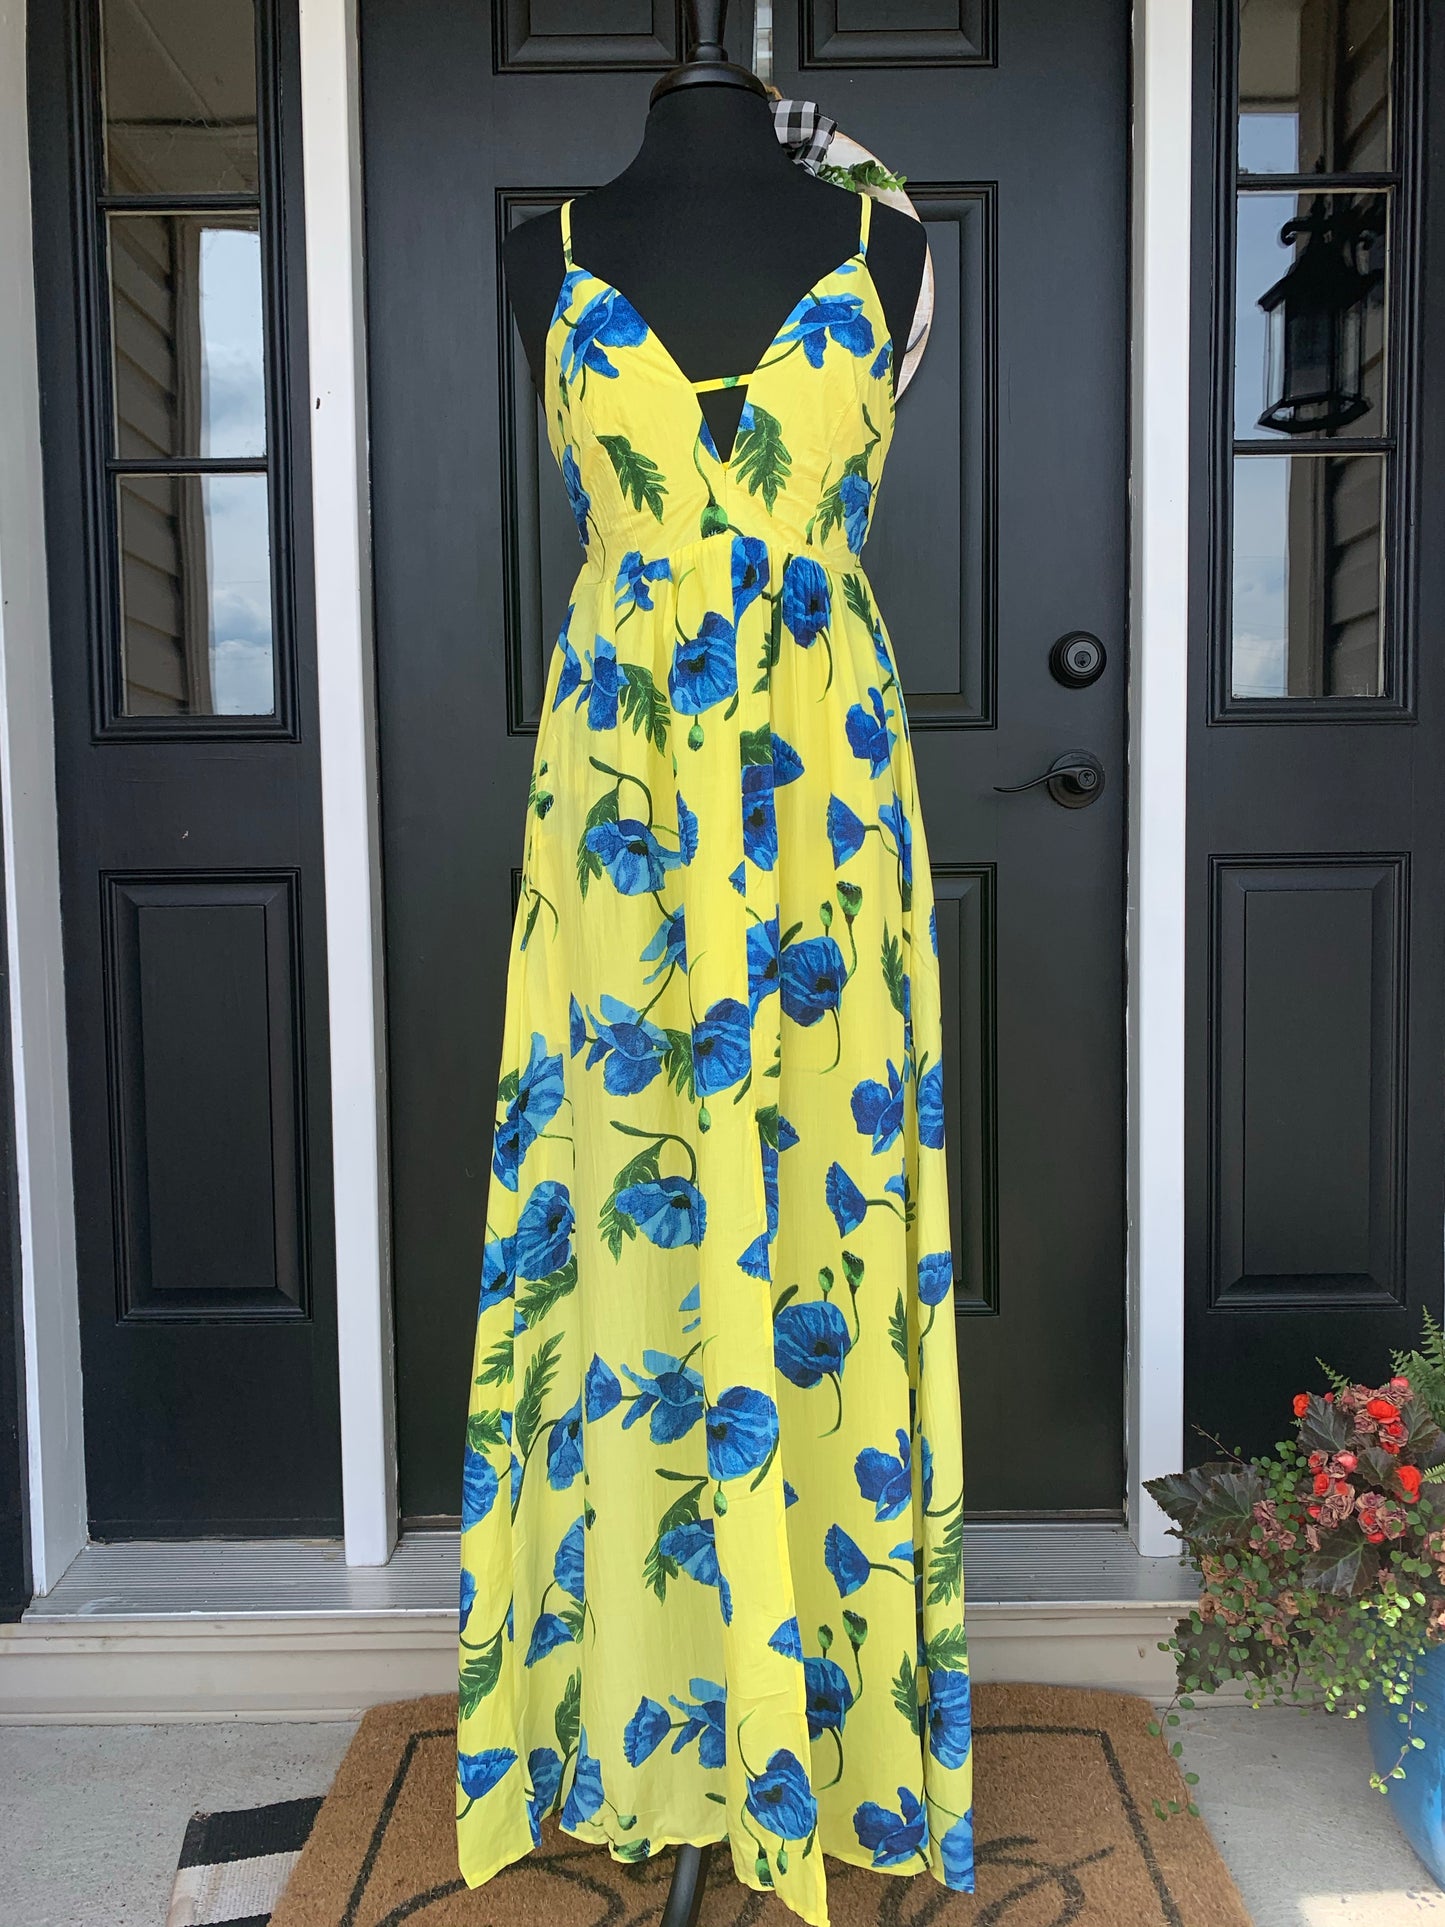 Yellow dress with blue flowers